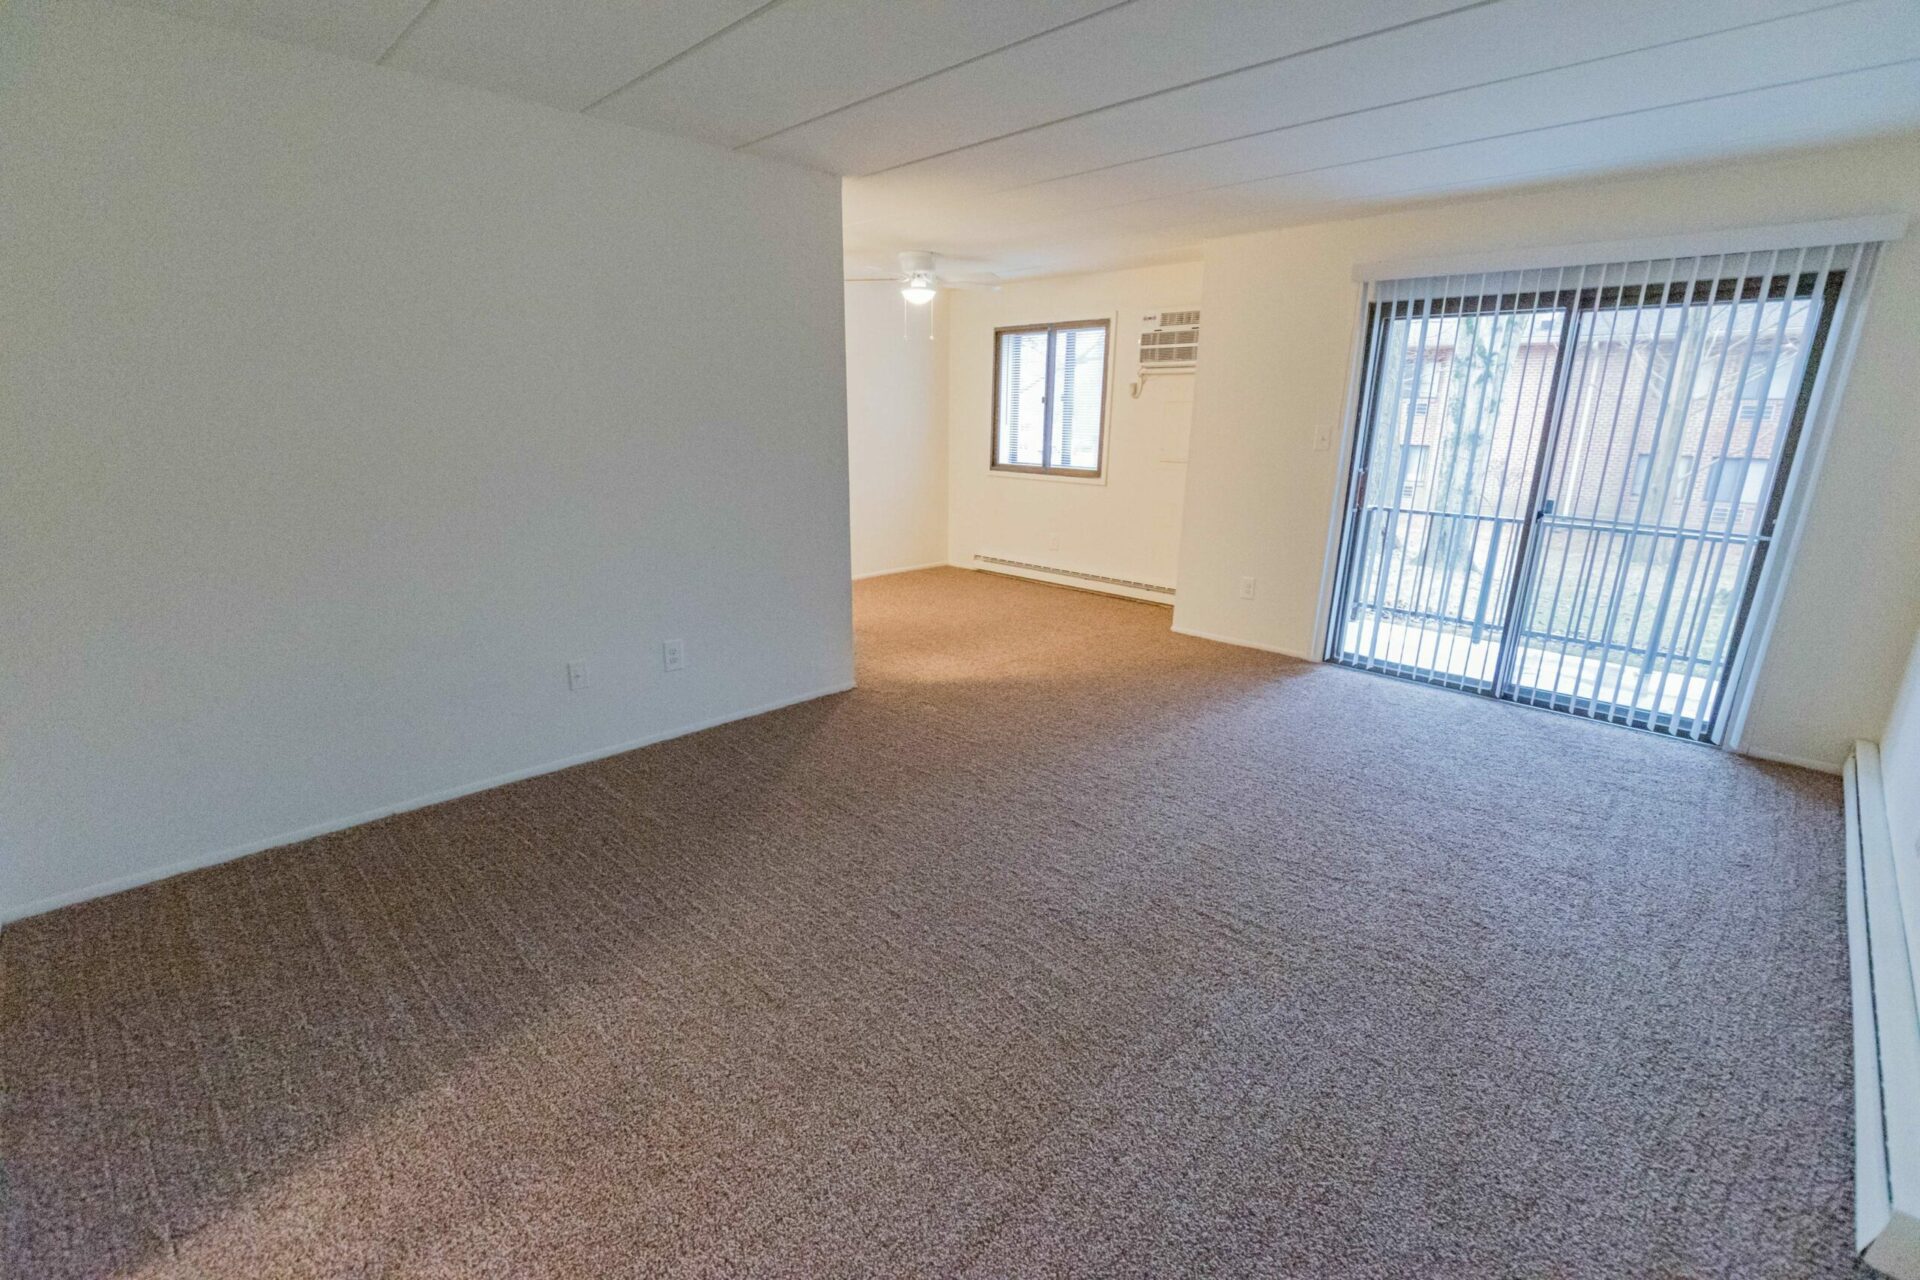 Whiteland West carpeted living area with sliding doors to a balcony